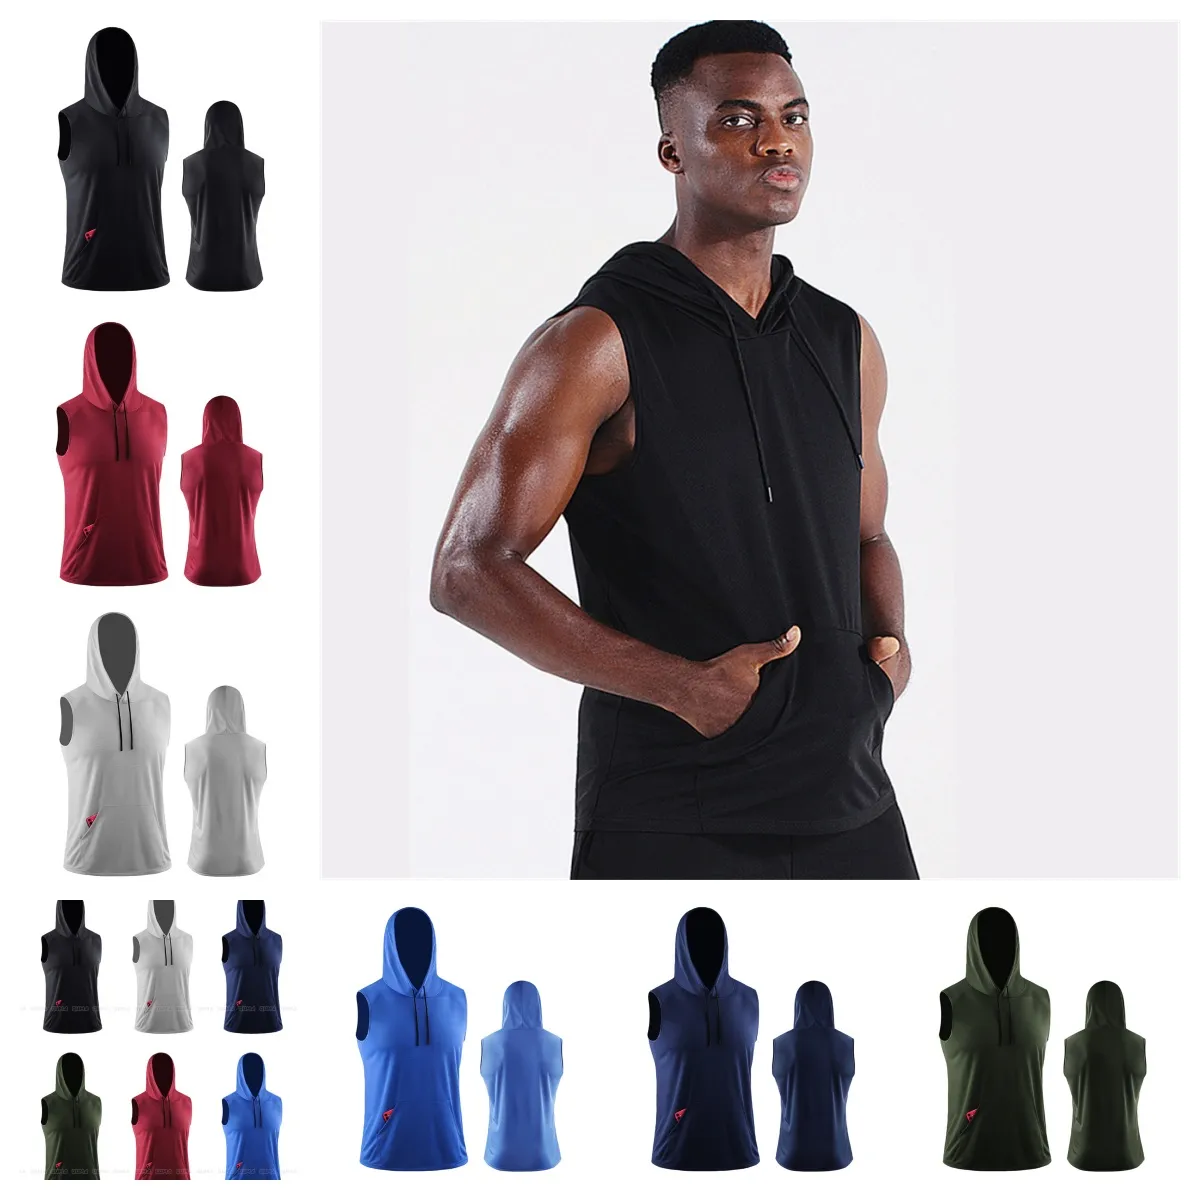 High Quality Gym Bodybuilding Mesh Tanks&Tops Summer Basketball Ridding Men Tops Quick Drying Workout T-shirts